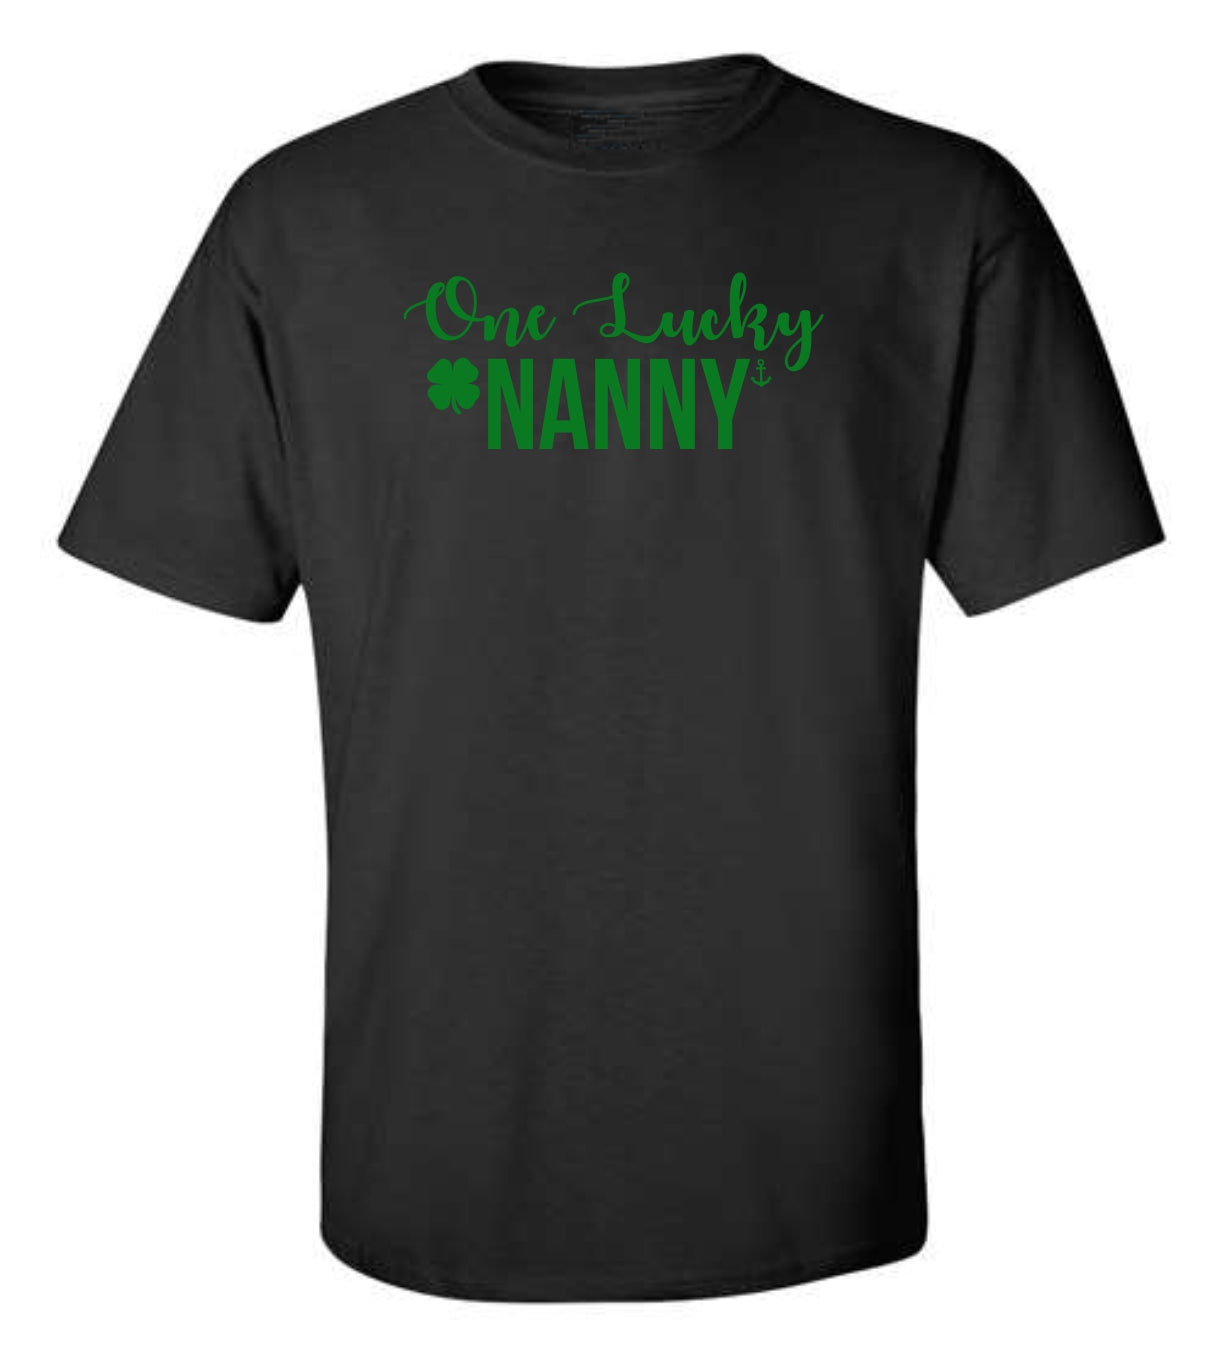 "One Lucky Nanny" T-Shirt